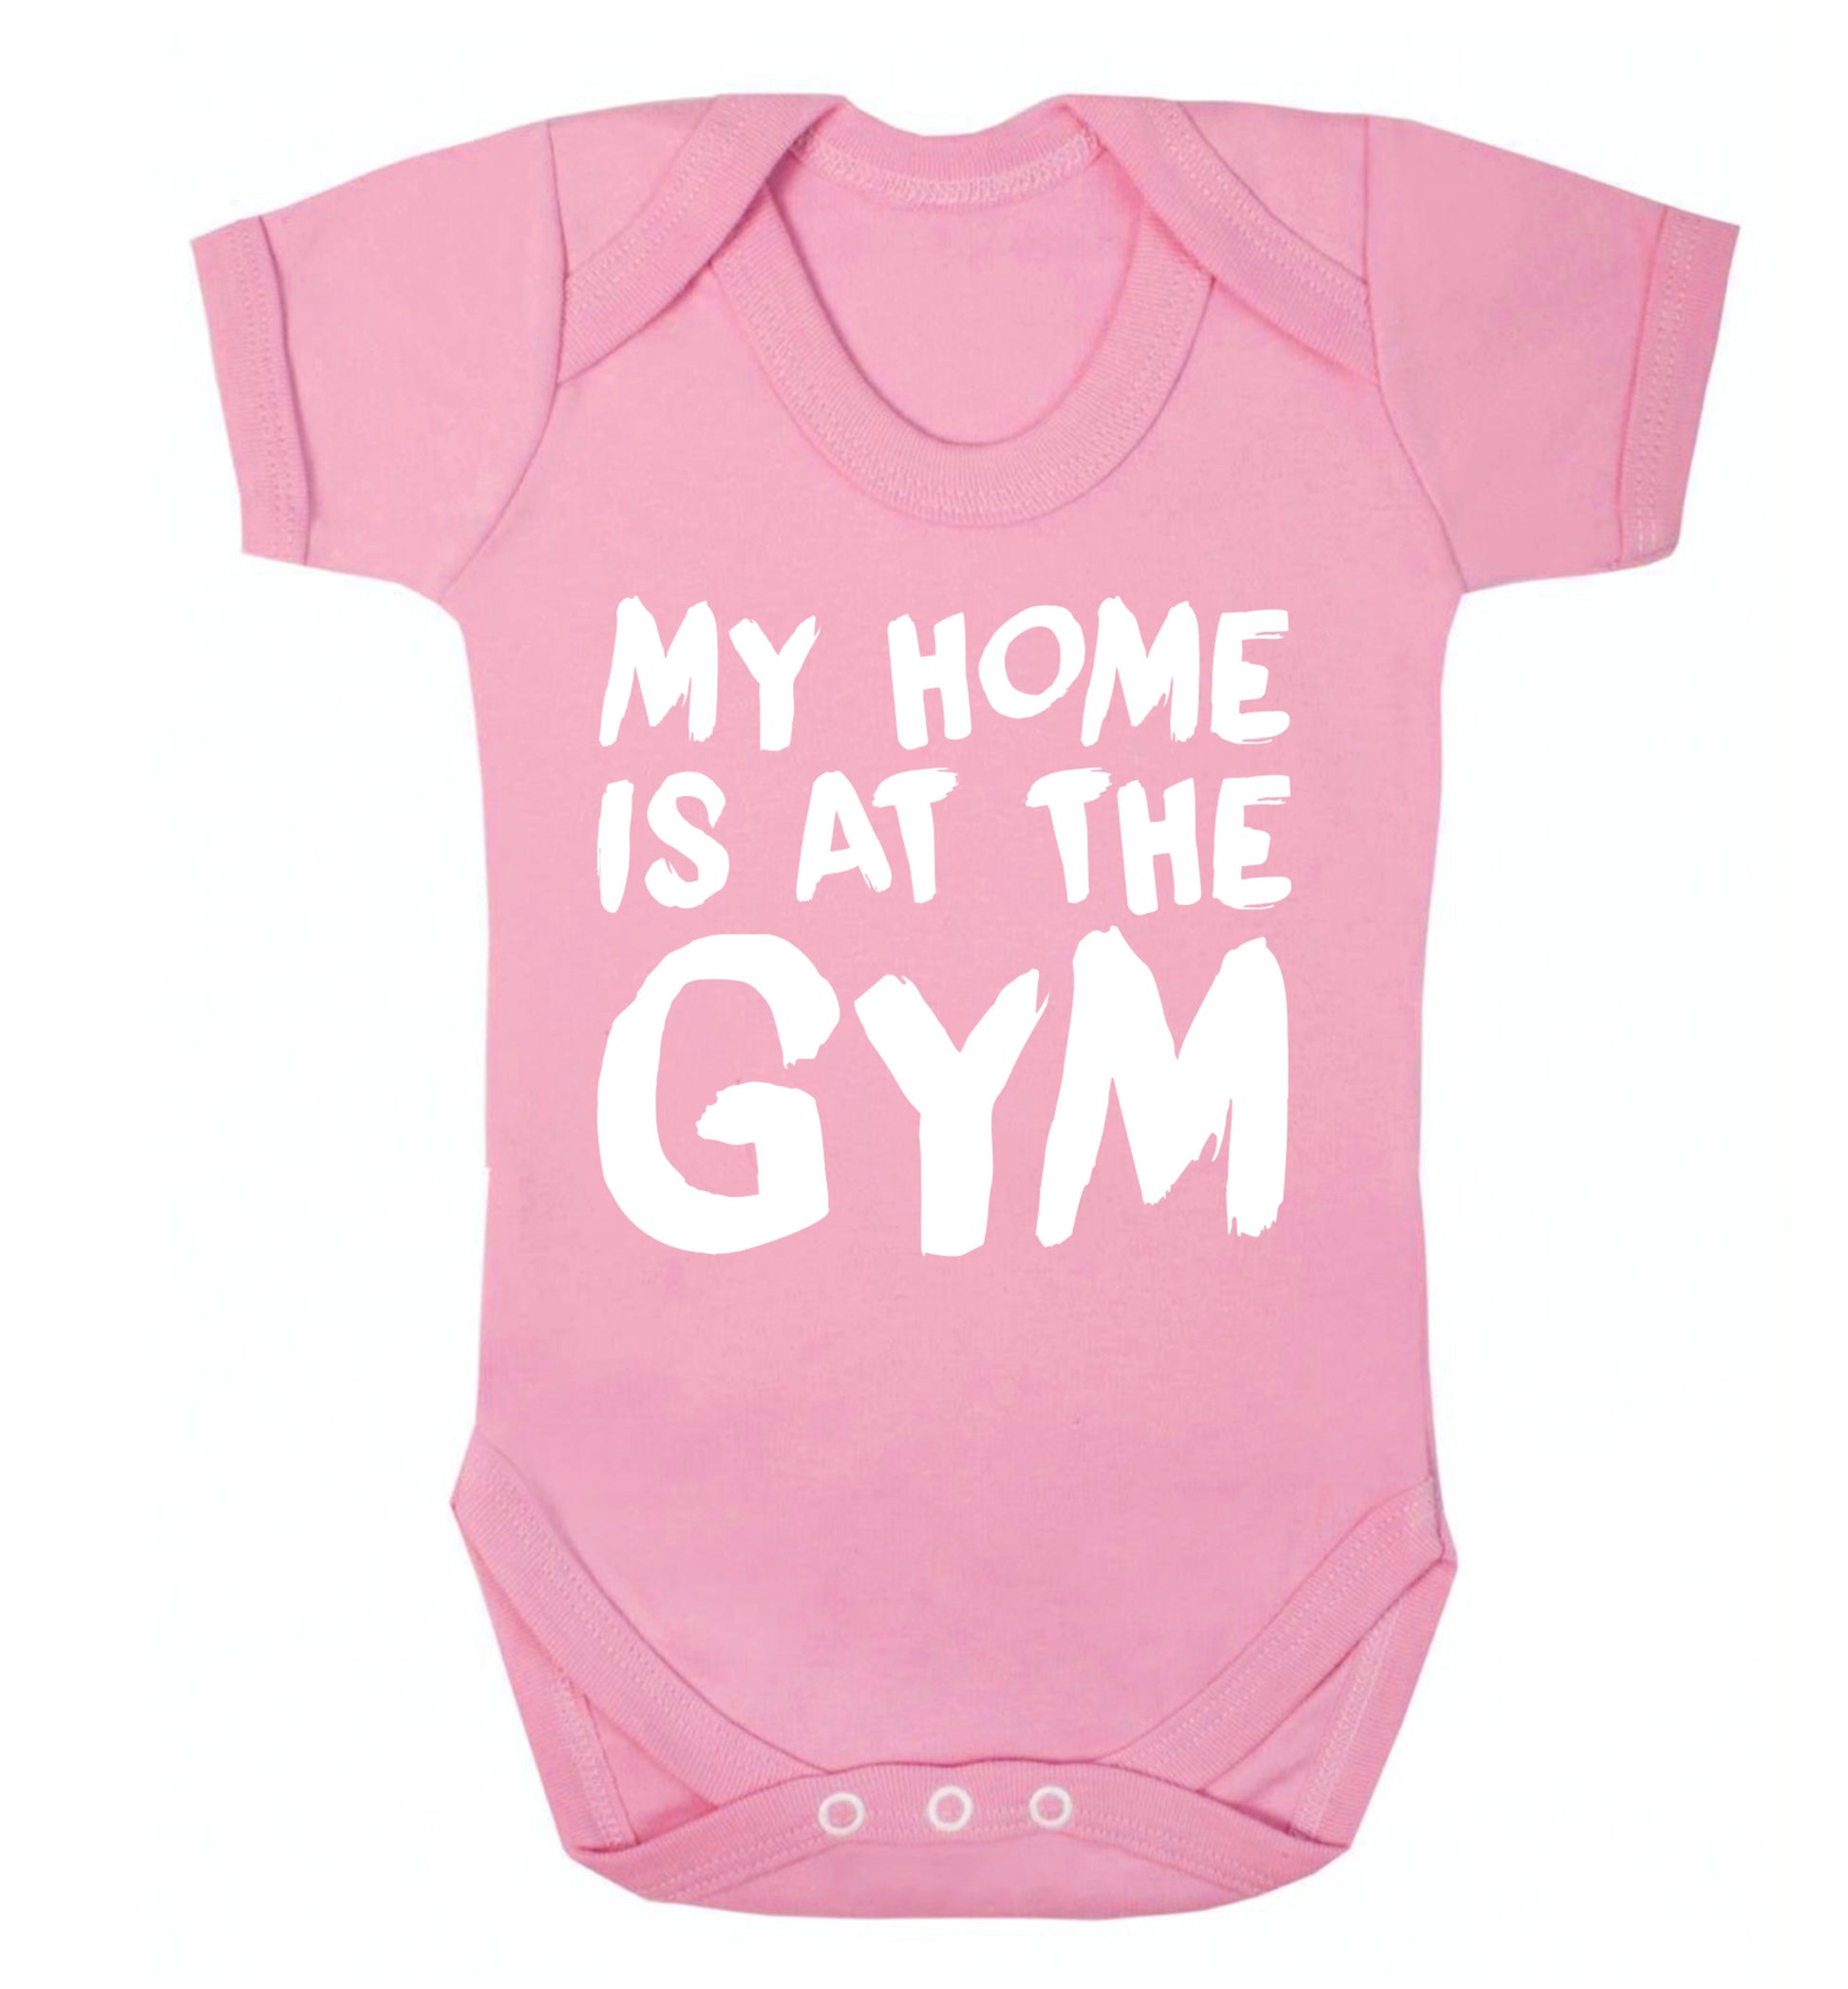 My home is at the gym Baby Vest pale pink 18-24 months